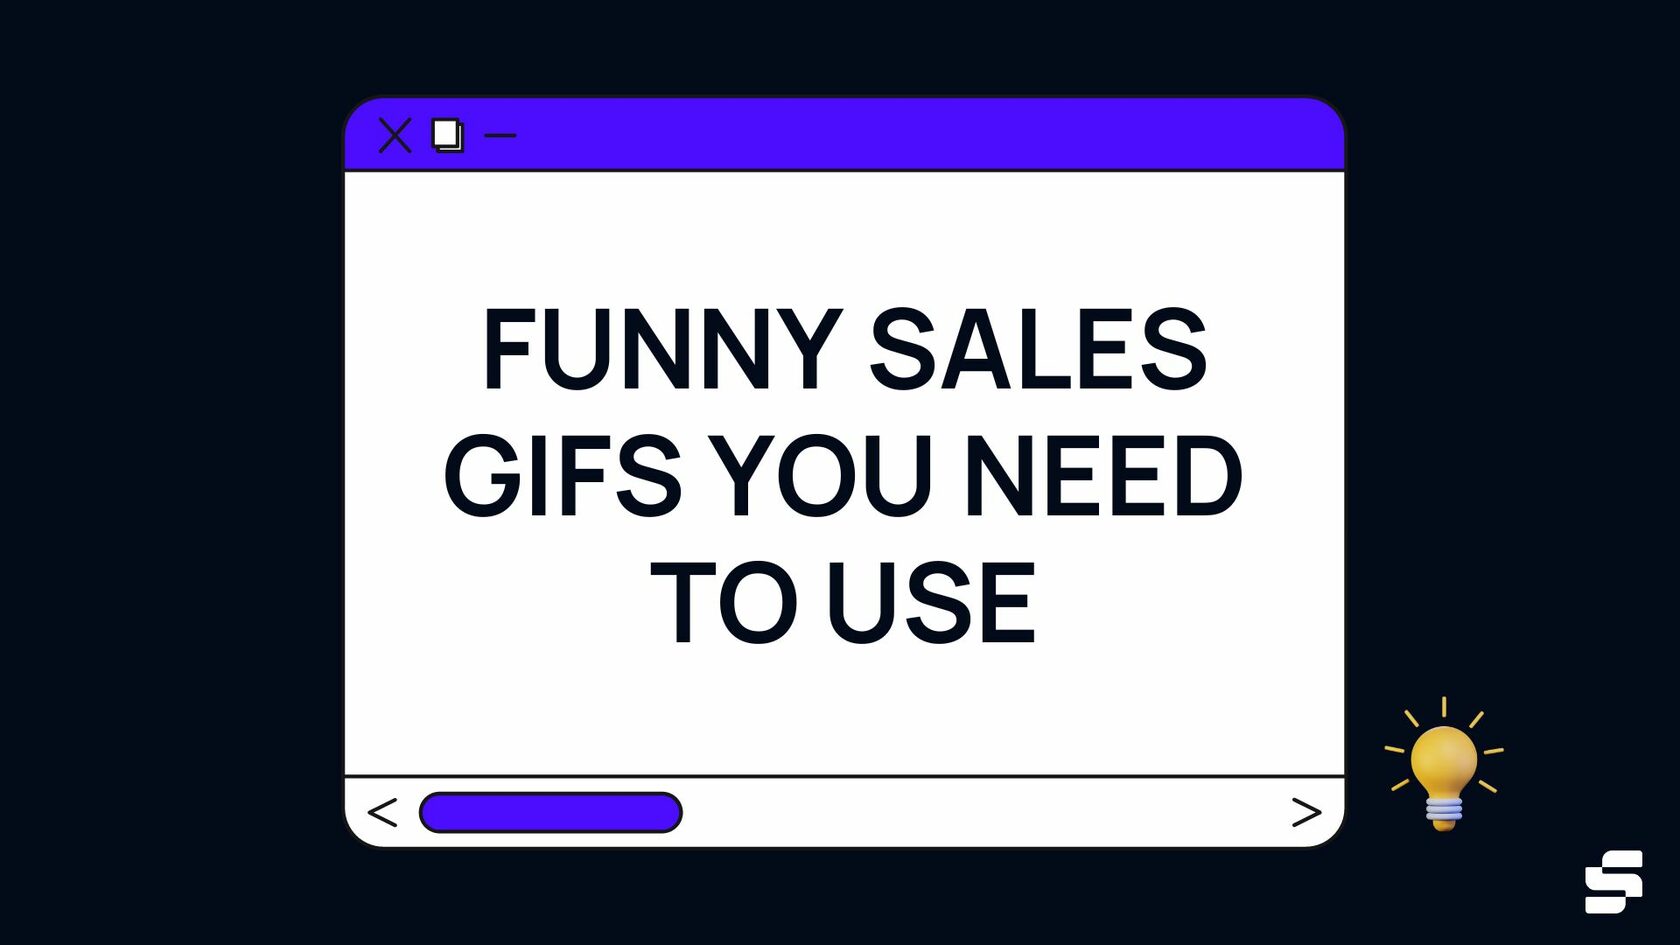 Instagram Gif to Use Funny